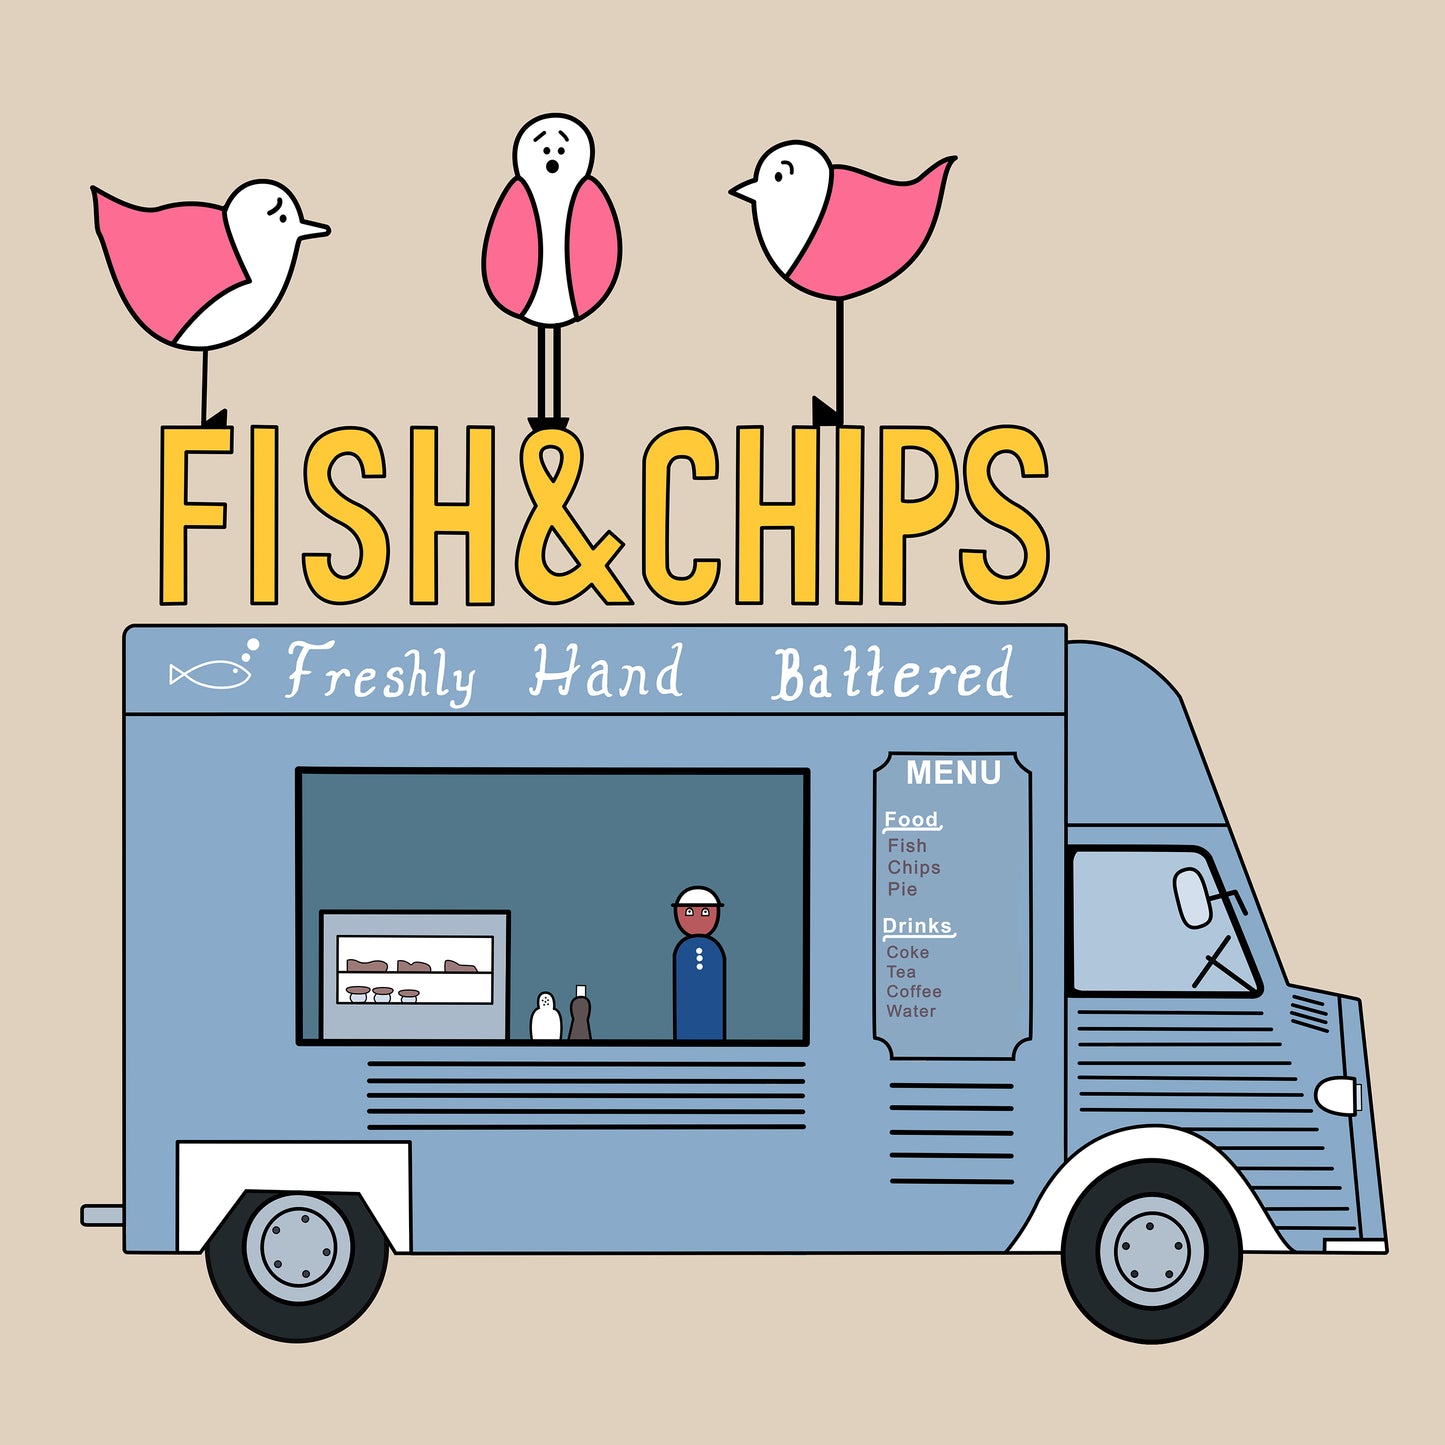 A grey van has a fish & chips sign in yellow on the roof with three pink winged seagulls perched on top. The van has freshly hand battered text in white with a menu and a small figure, salt and vinegar and battered foods on display. The background is a light beige colour.